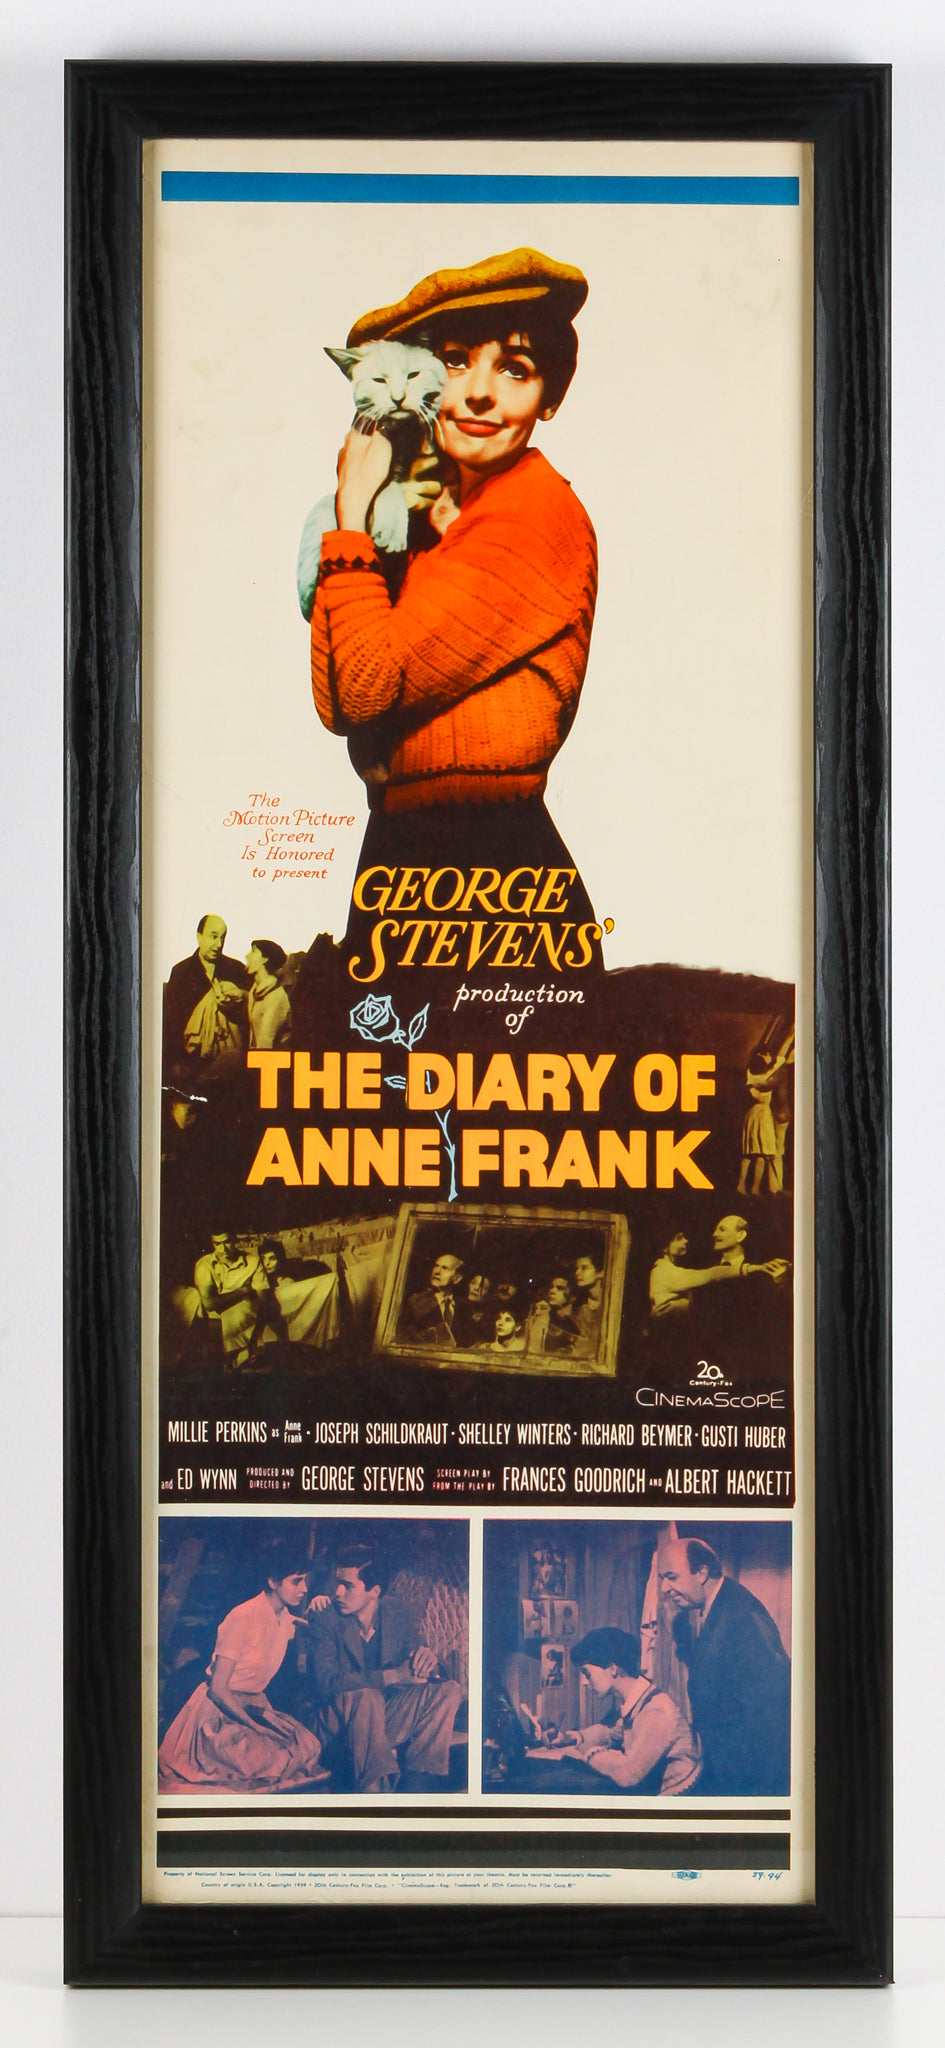 Vintage Movie Poster "The Diary of Anne Frank" - Lithographic Print